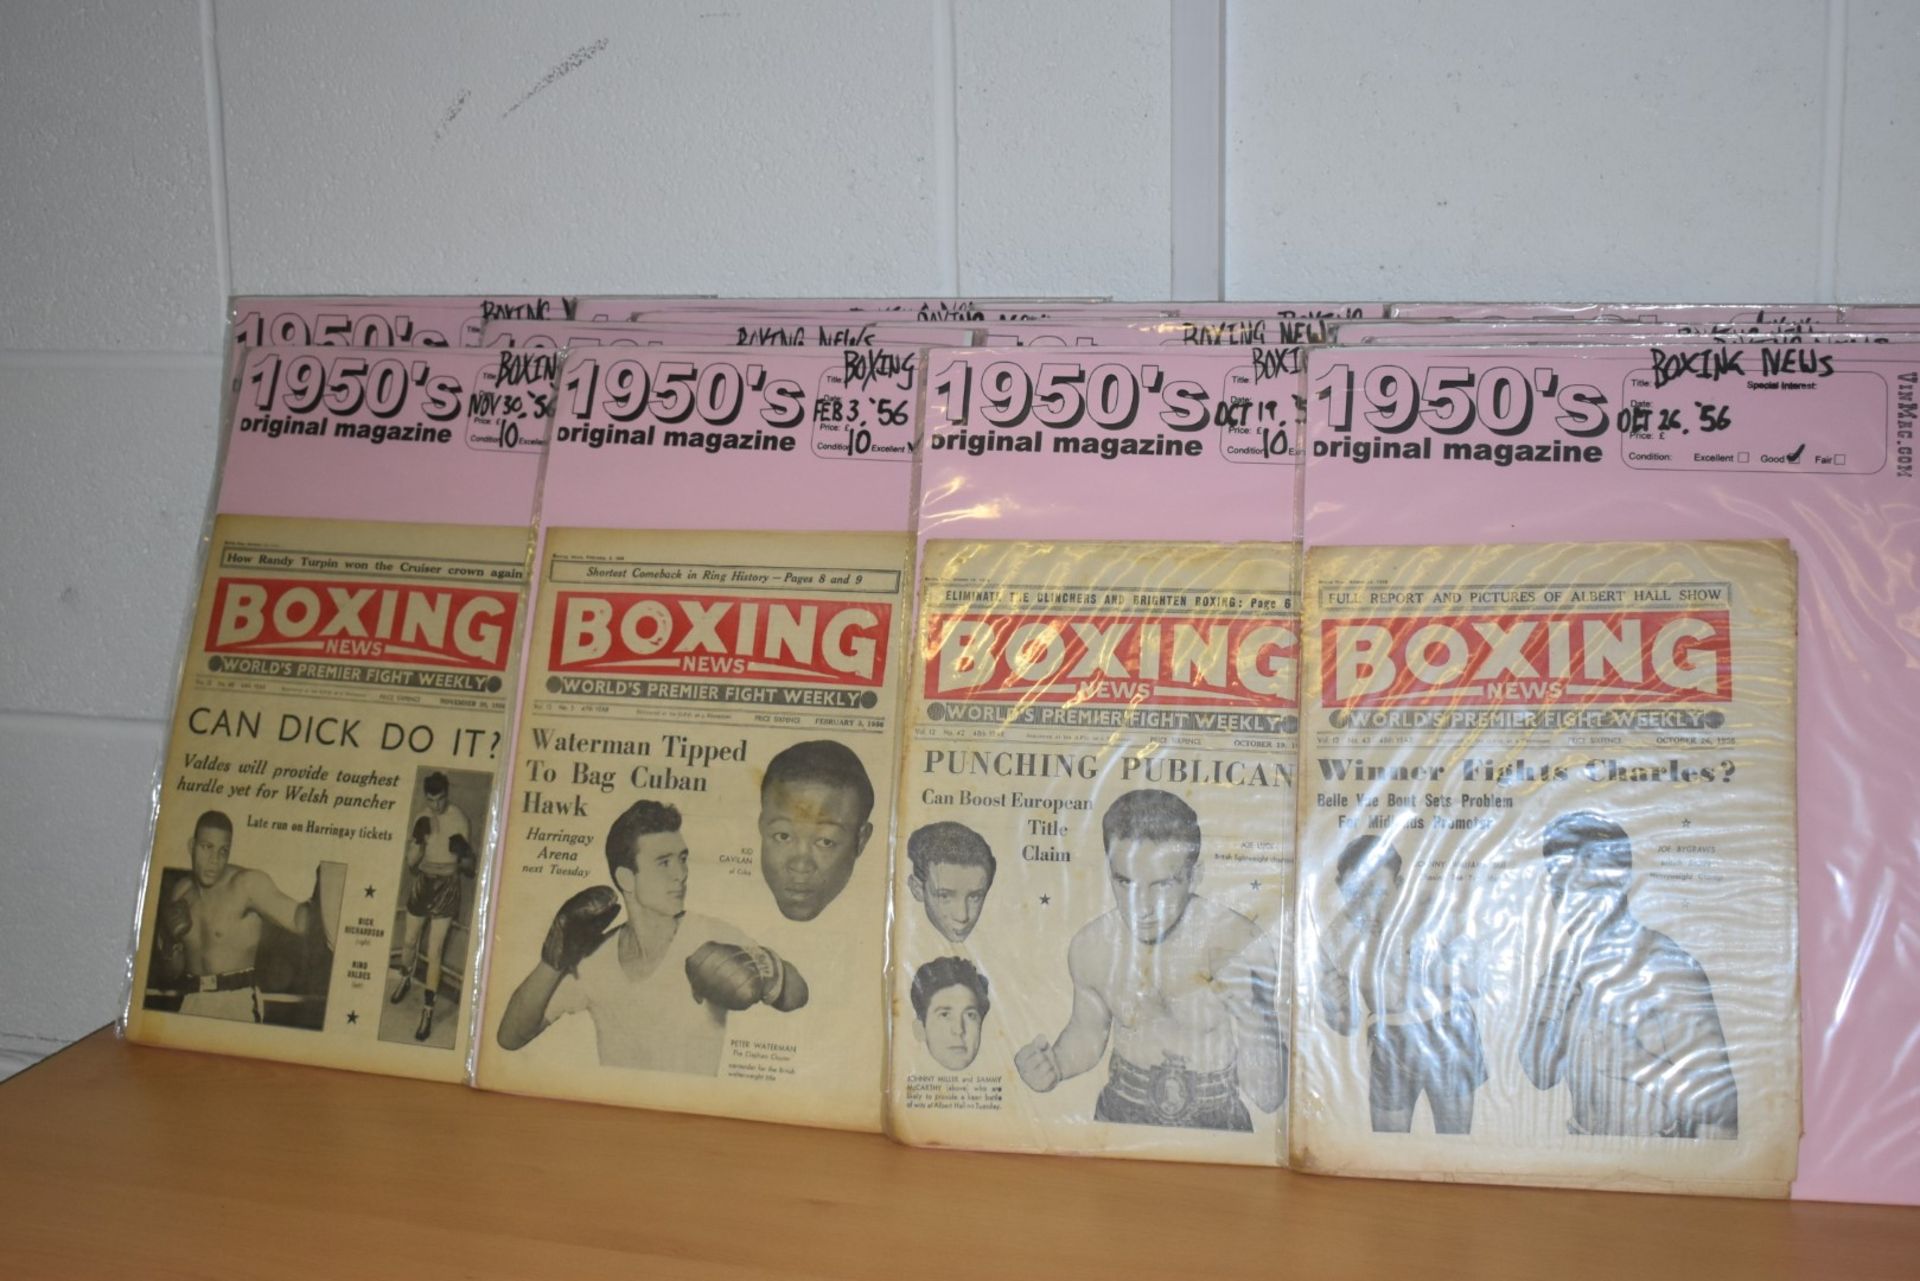 56 x Vintage Boxing News Magazines Dated 1955 to 1959 - Ref MB100/101/102 - Individually Packaged - Image 23 of 28